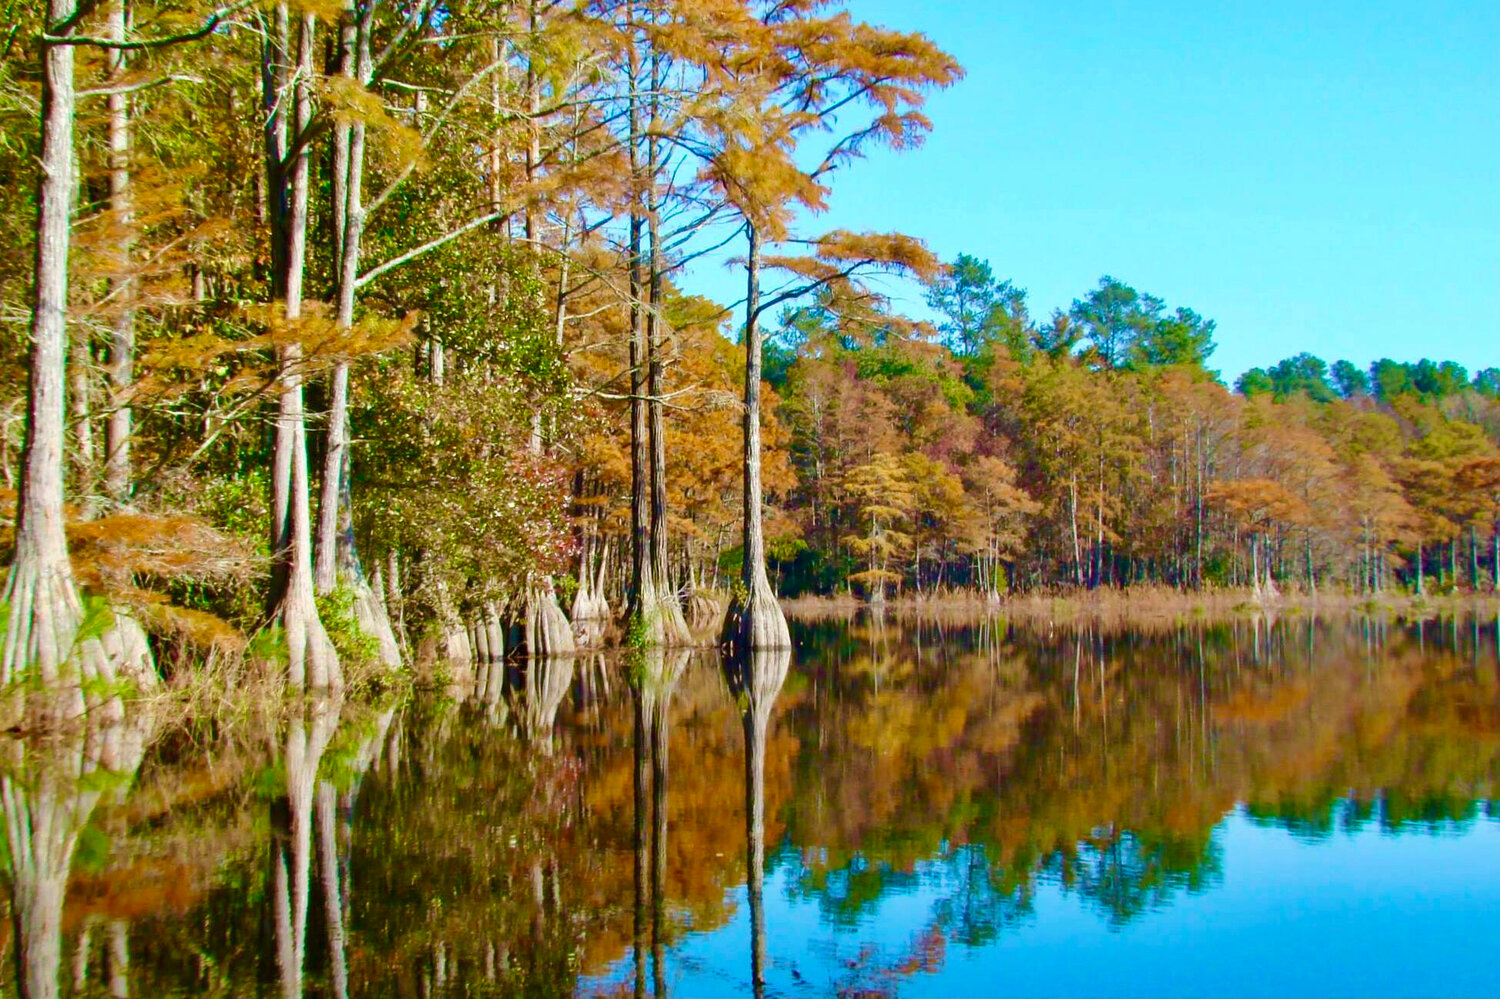 The bald cypress trees take on the colors of fall, transforming Hope Mills Lake.Photo by Lisa Carter Waring